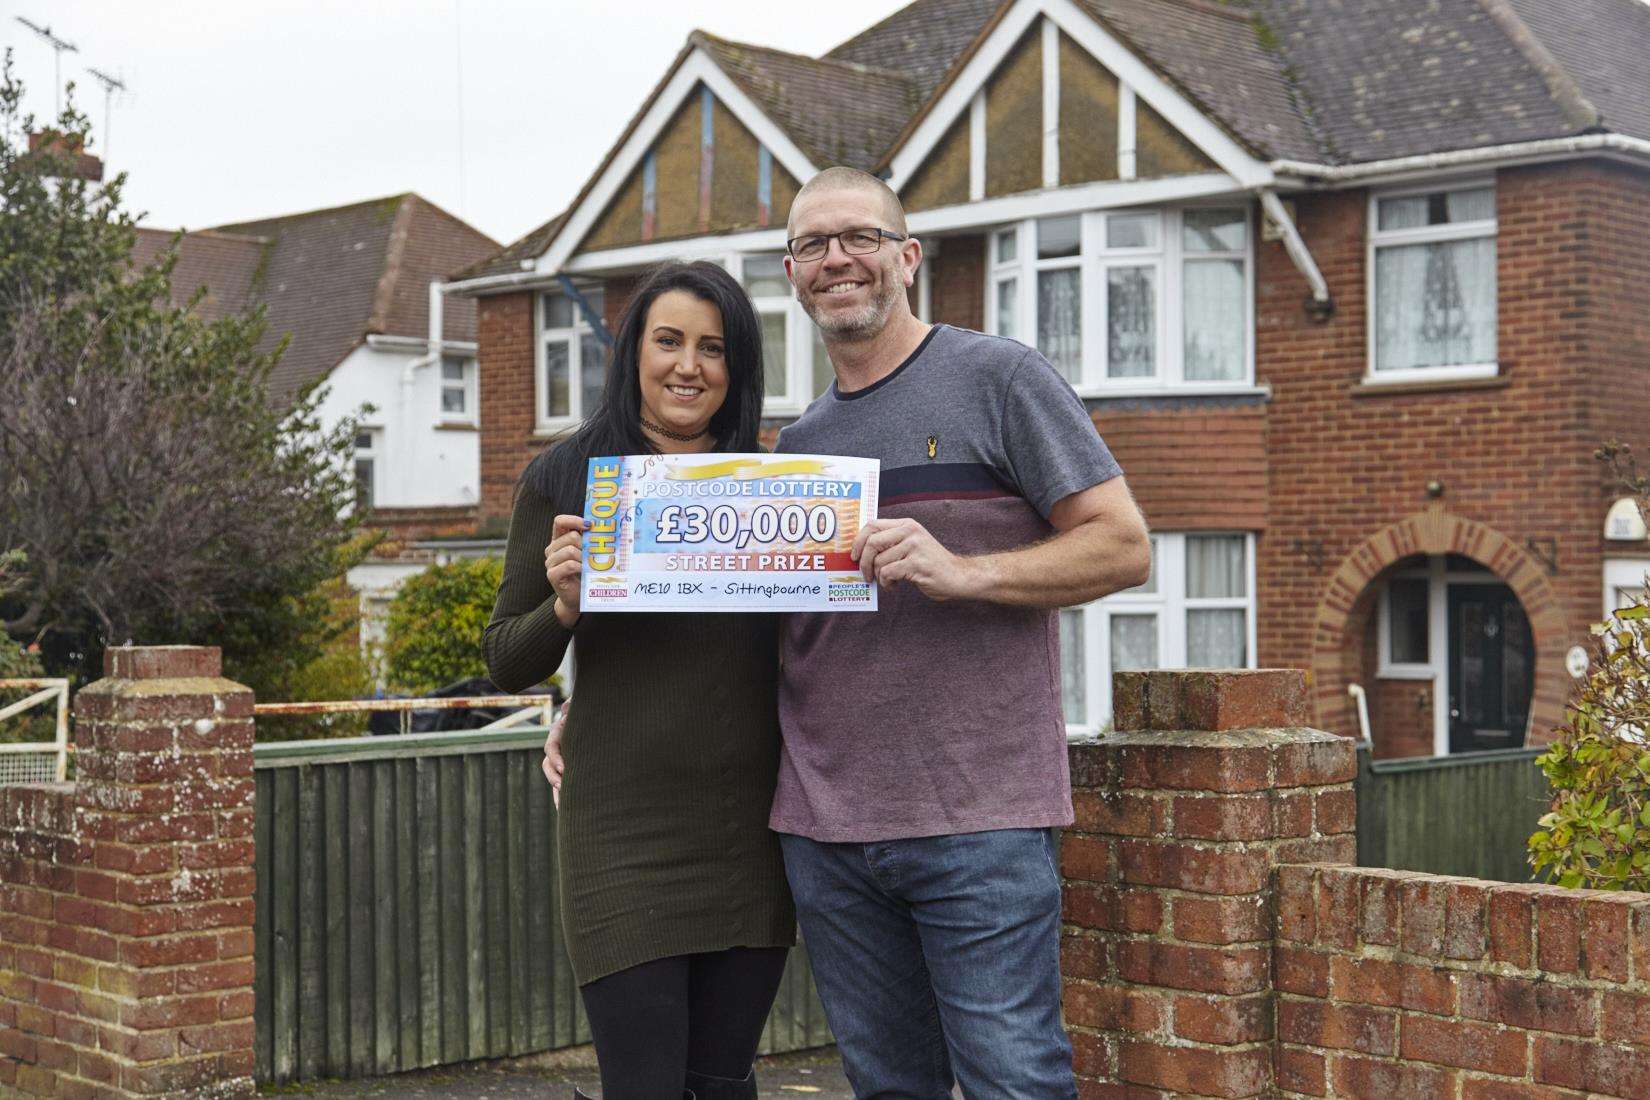 Wayne Mitchell and fiancée Michelle won money with the Postcode lottery (5608841)